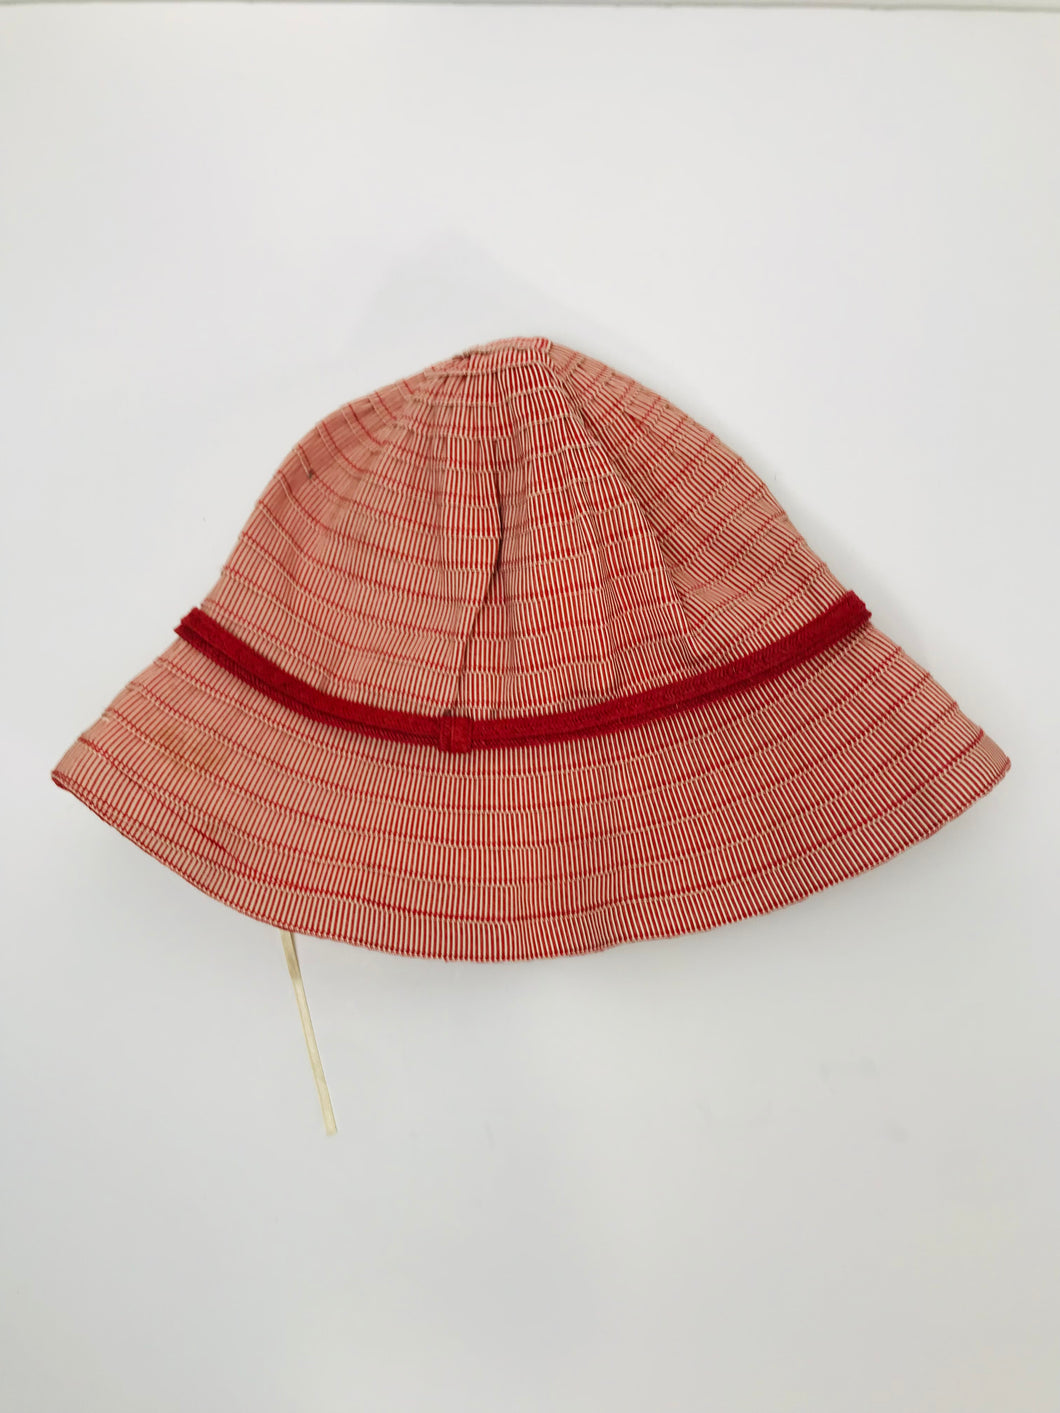 Suzanne Bettley Women's Striped Sun Hat | One Size | Red